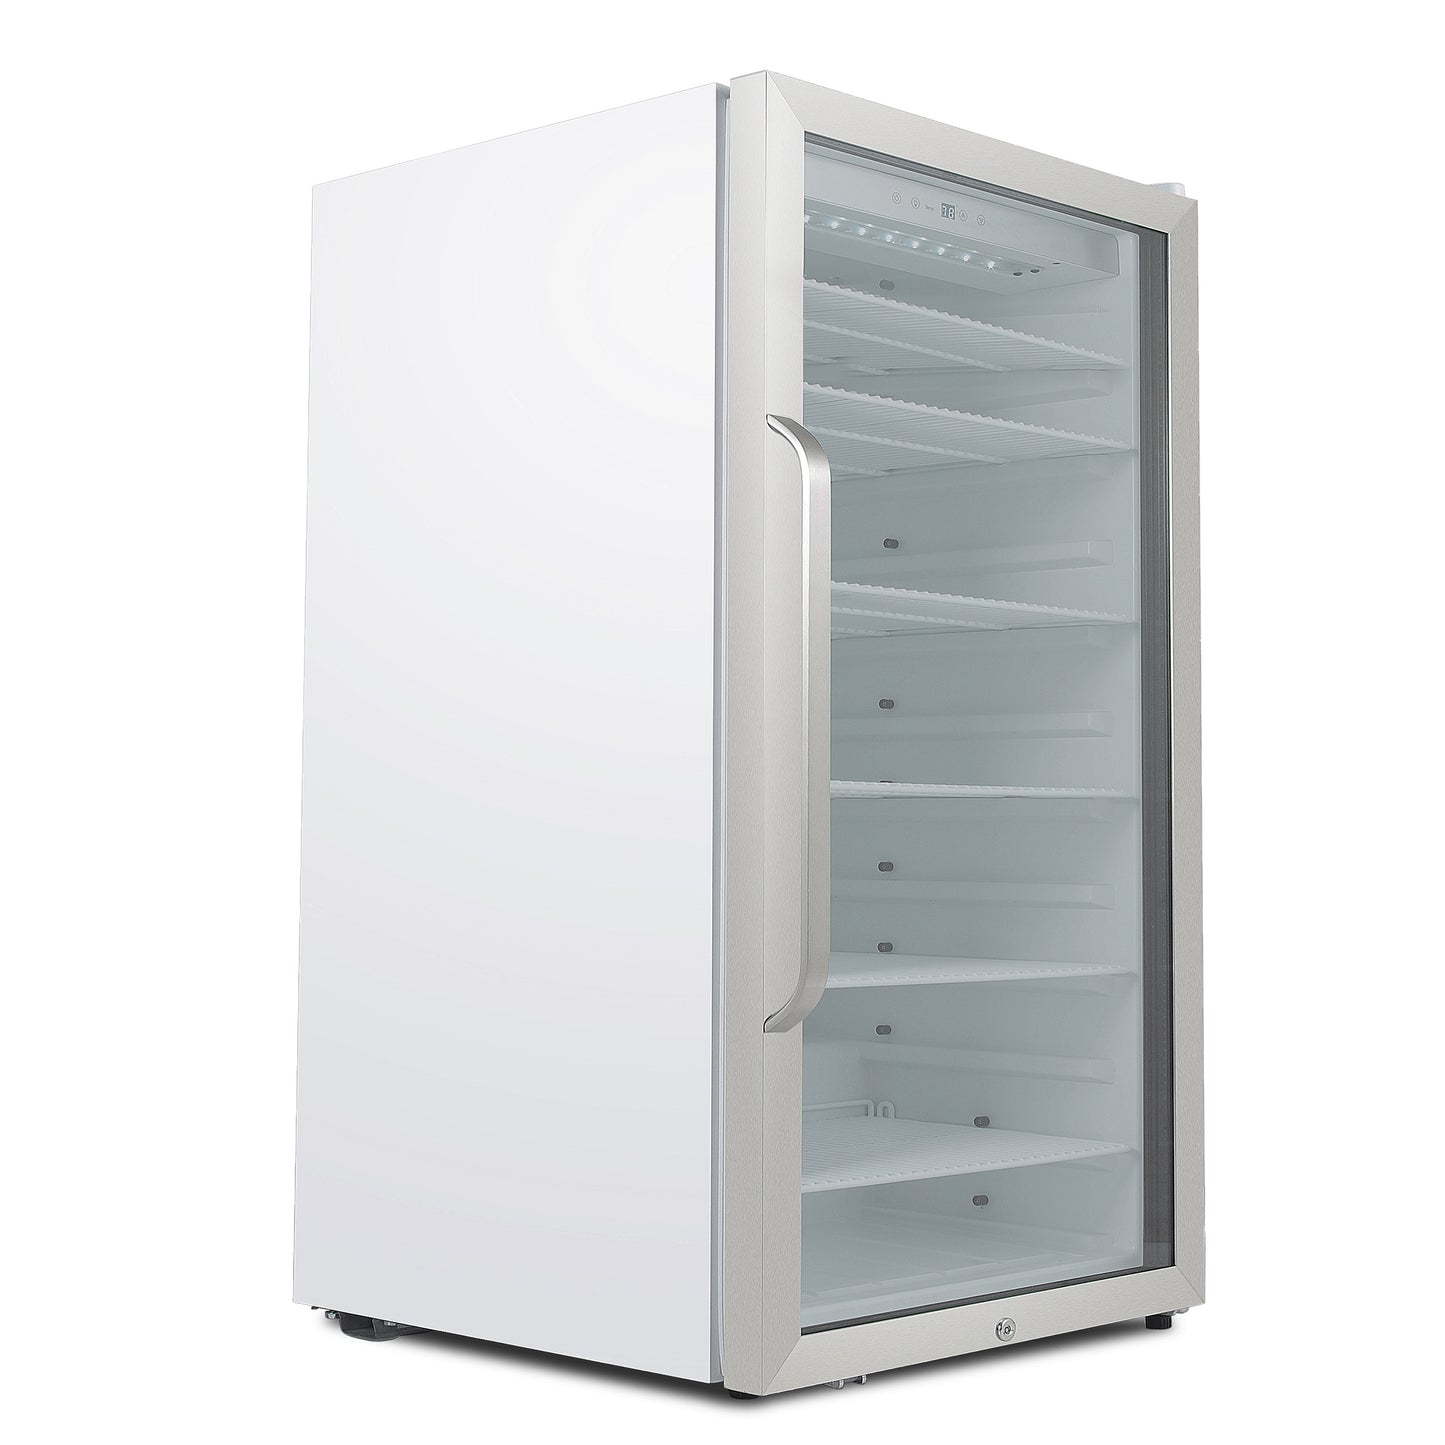 Buy a Whynter 308 Cans Freestanding 10.6 cu. ft. Stainless Steel Commercial Beverage Merchandiser with Superlit Door and Lock -White by Chilled Beverages